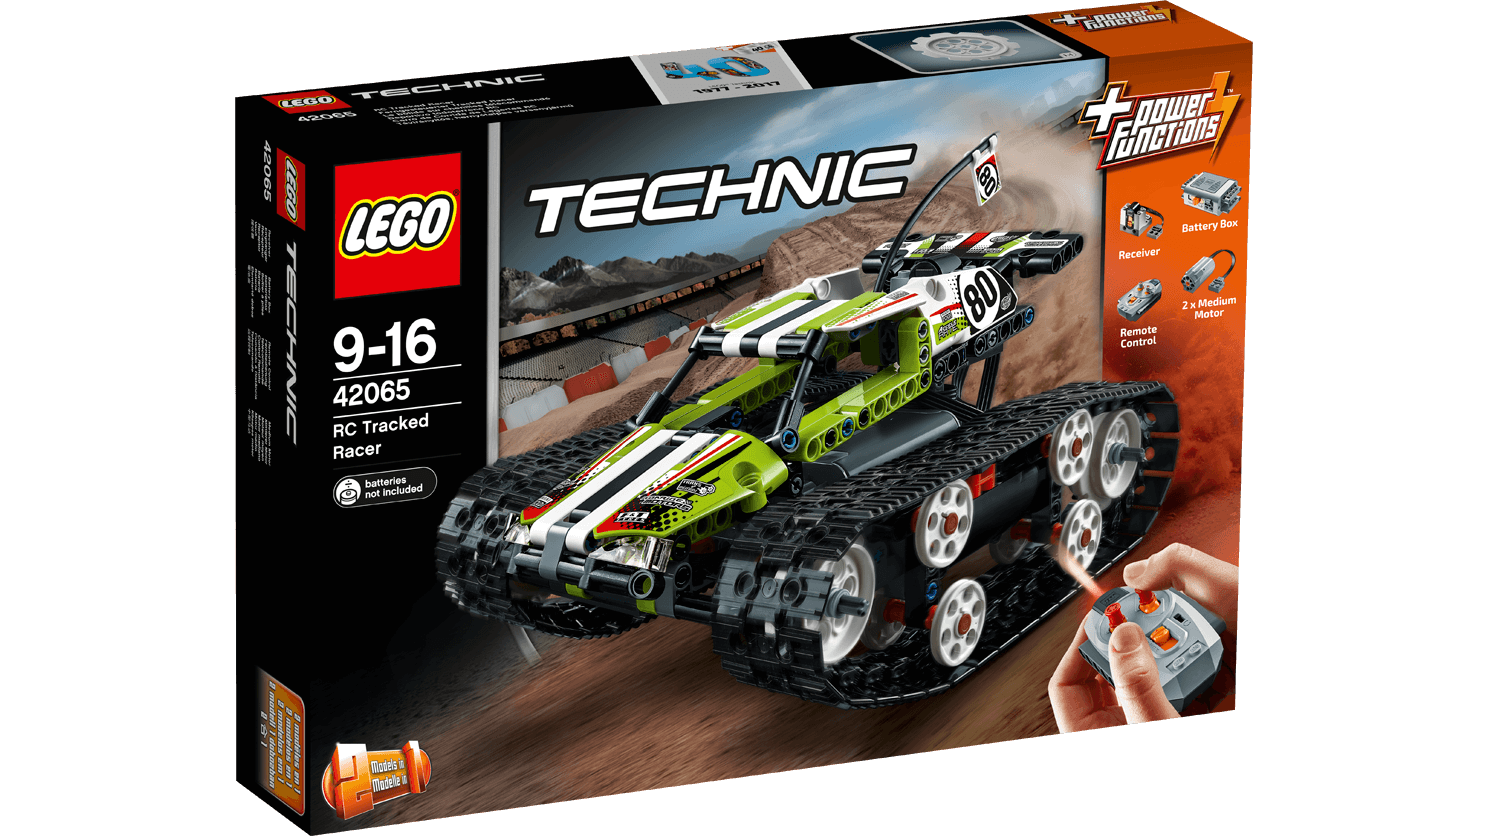 42065 - RC Tracked Racer